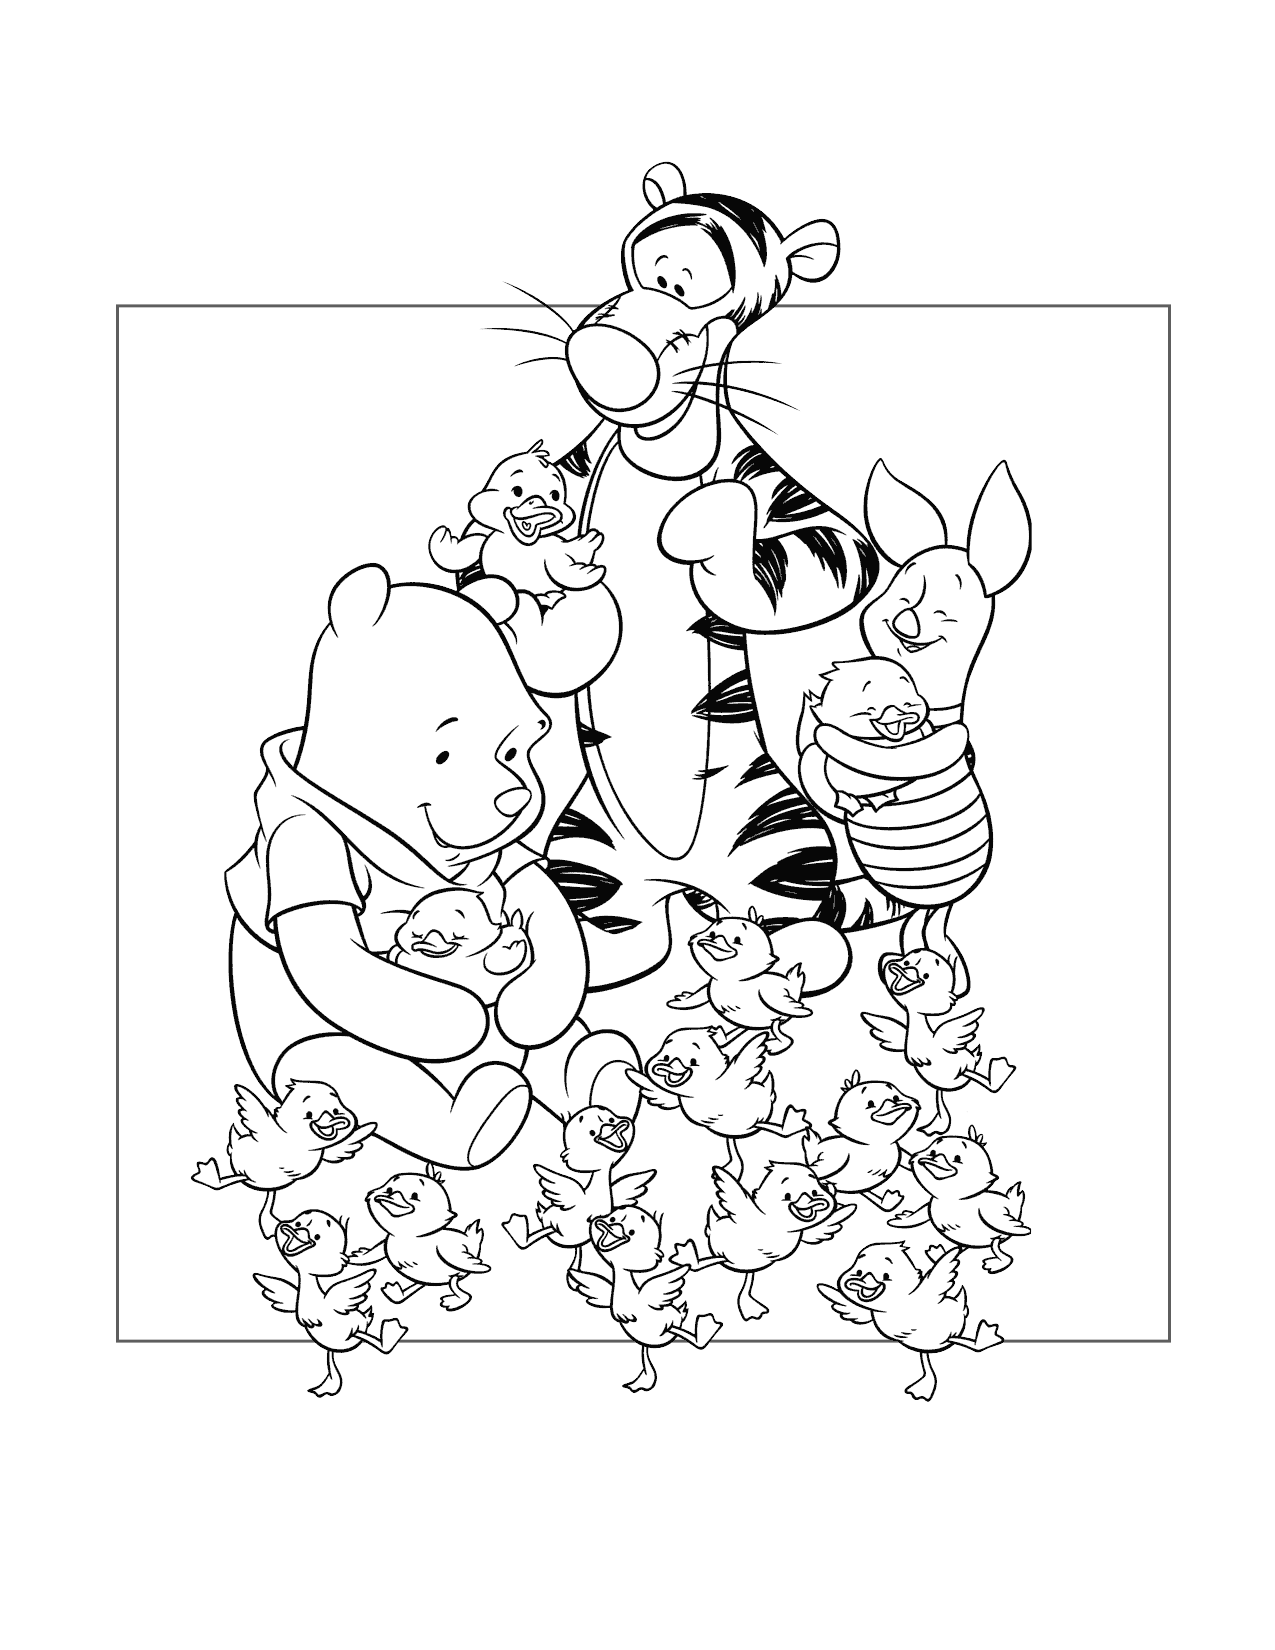 Tigger Pooh Piglet And Ducklings Coloring Page